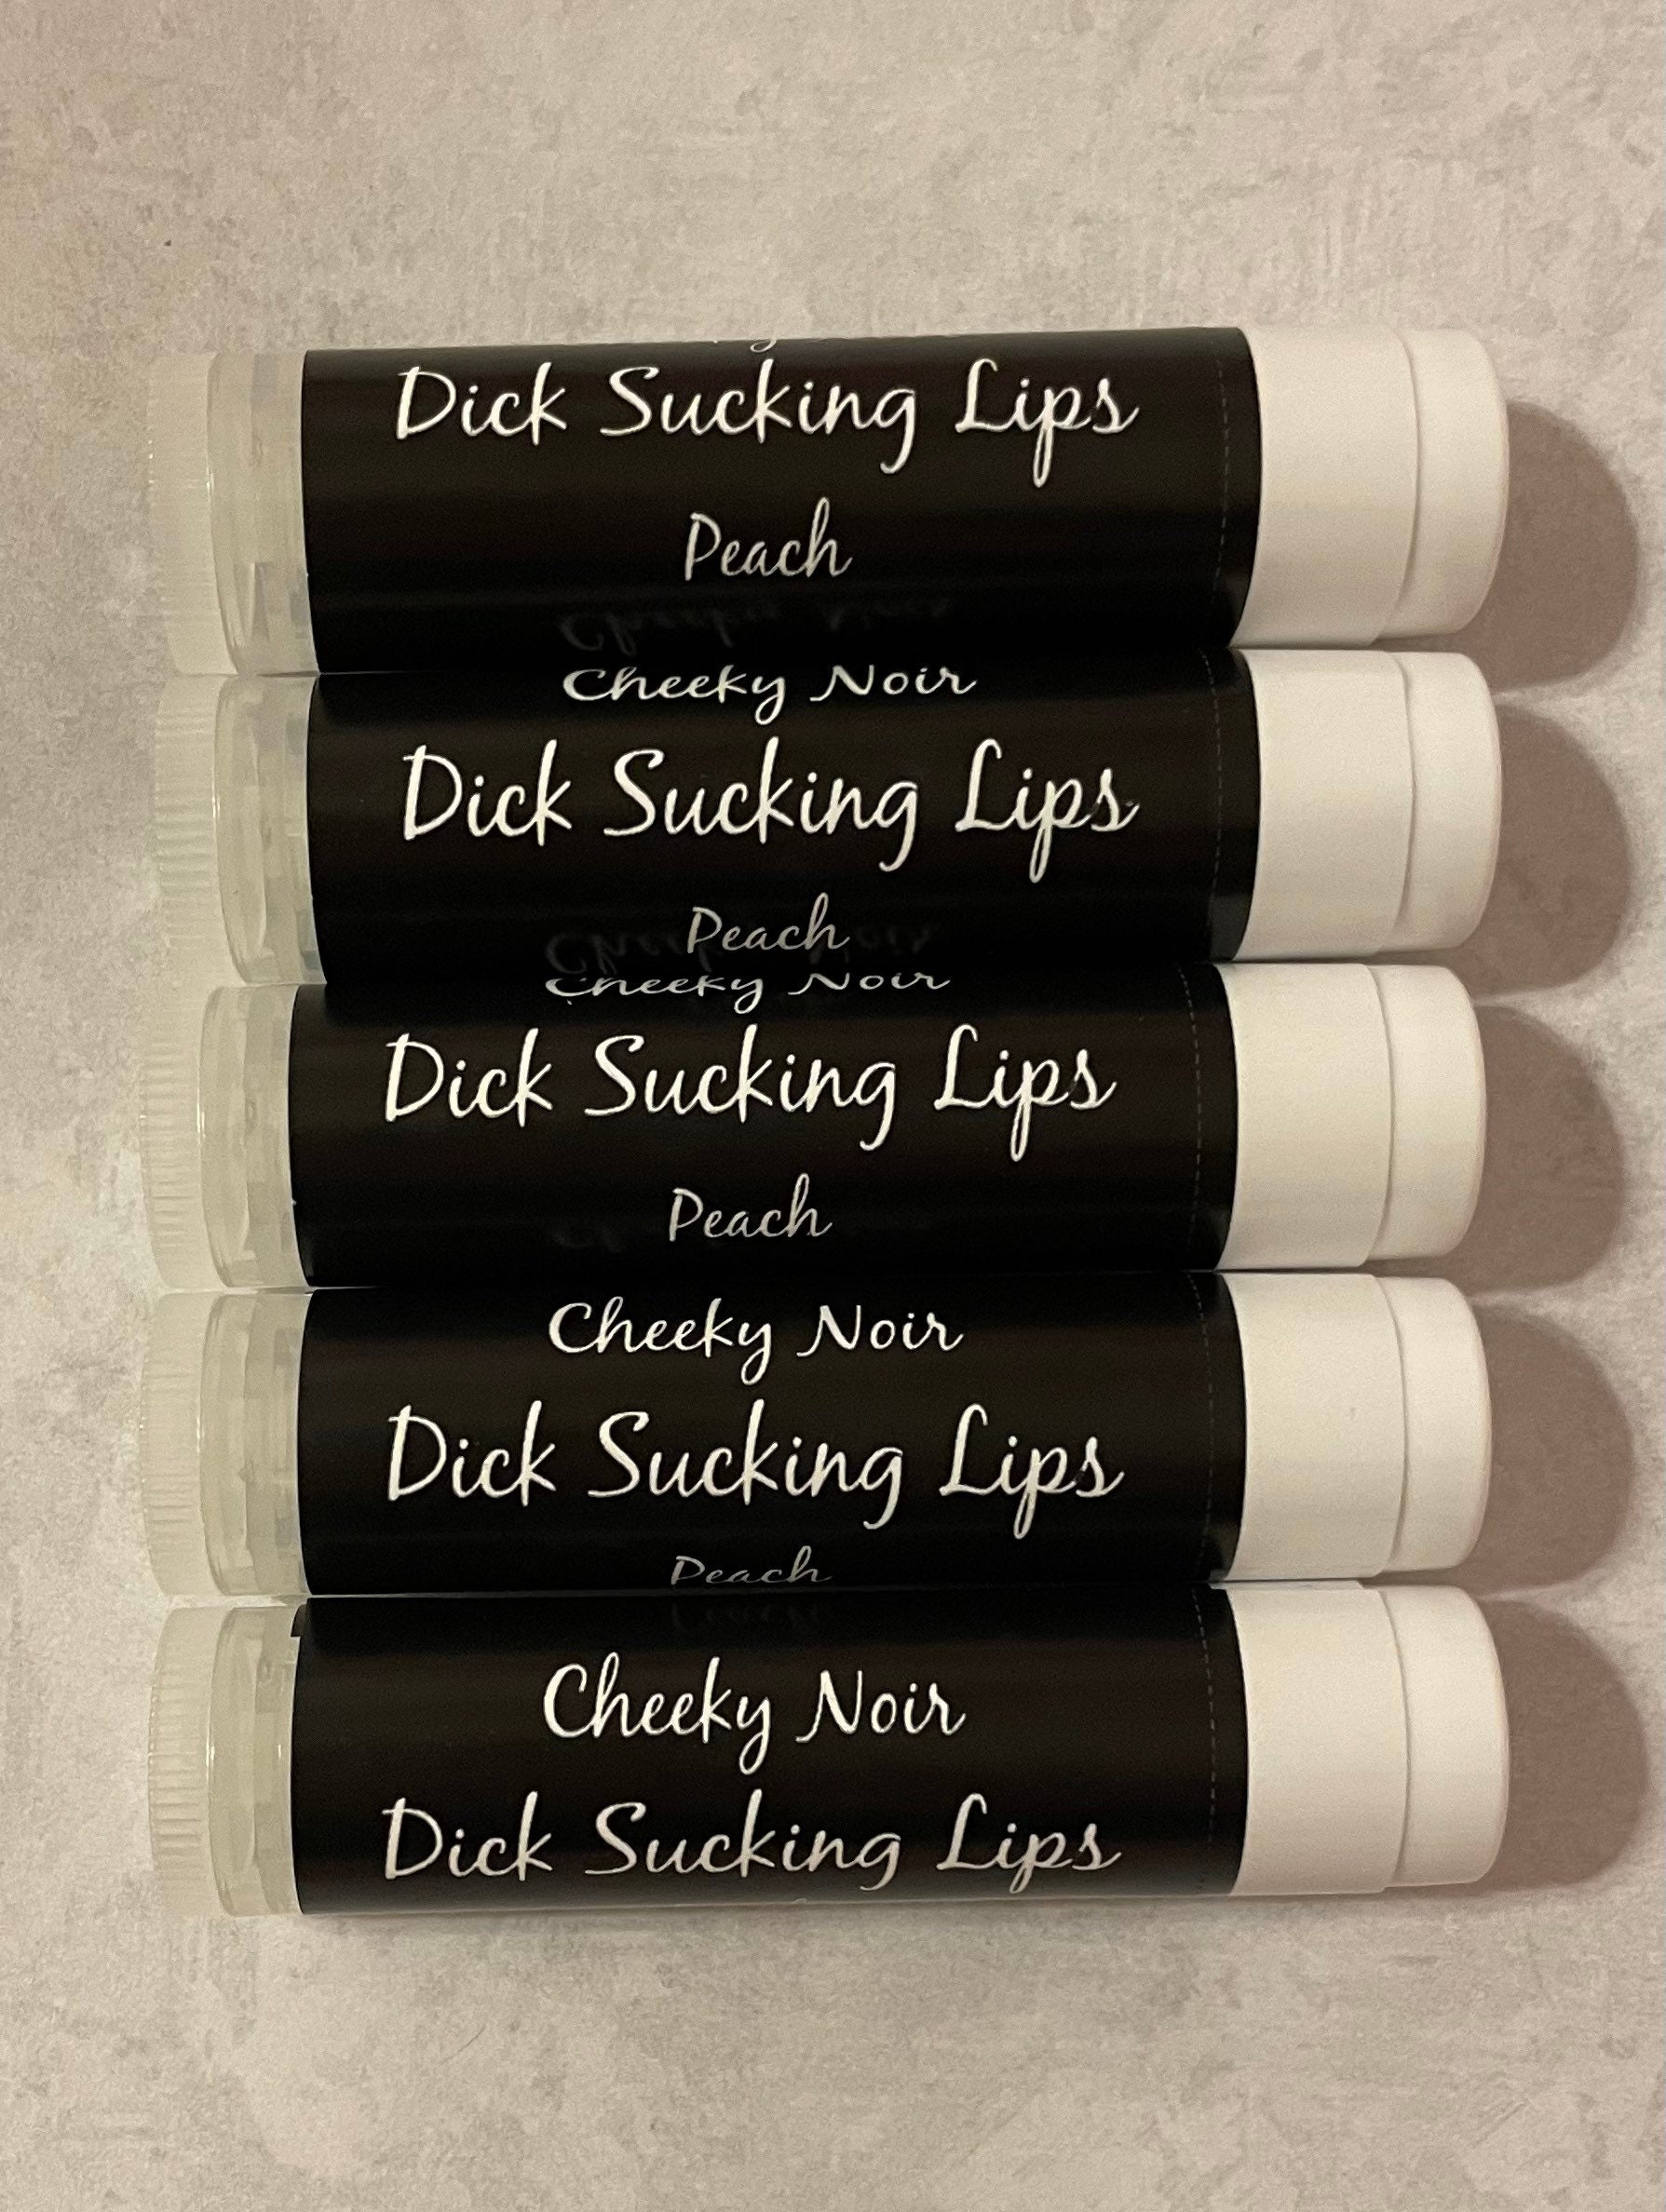 donald duty recommends dick sucking lip gloss pic